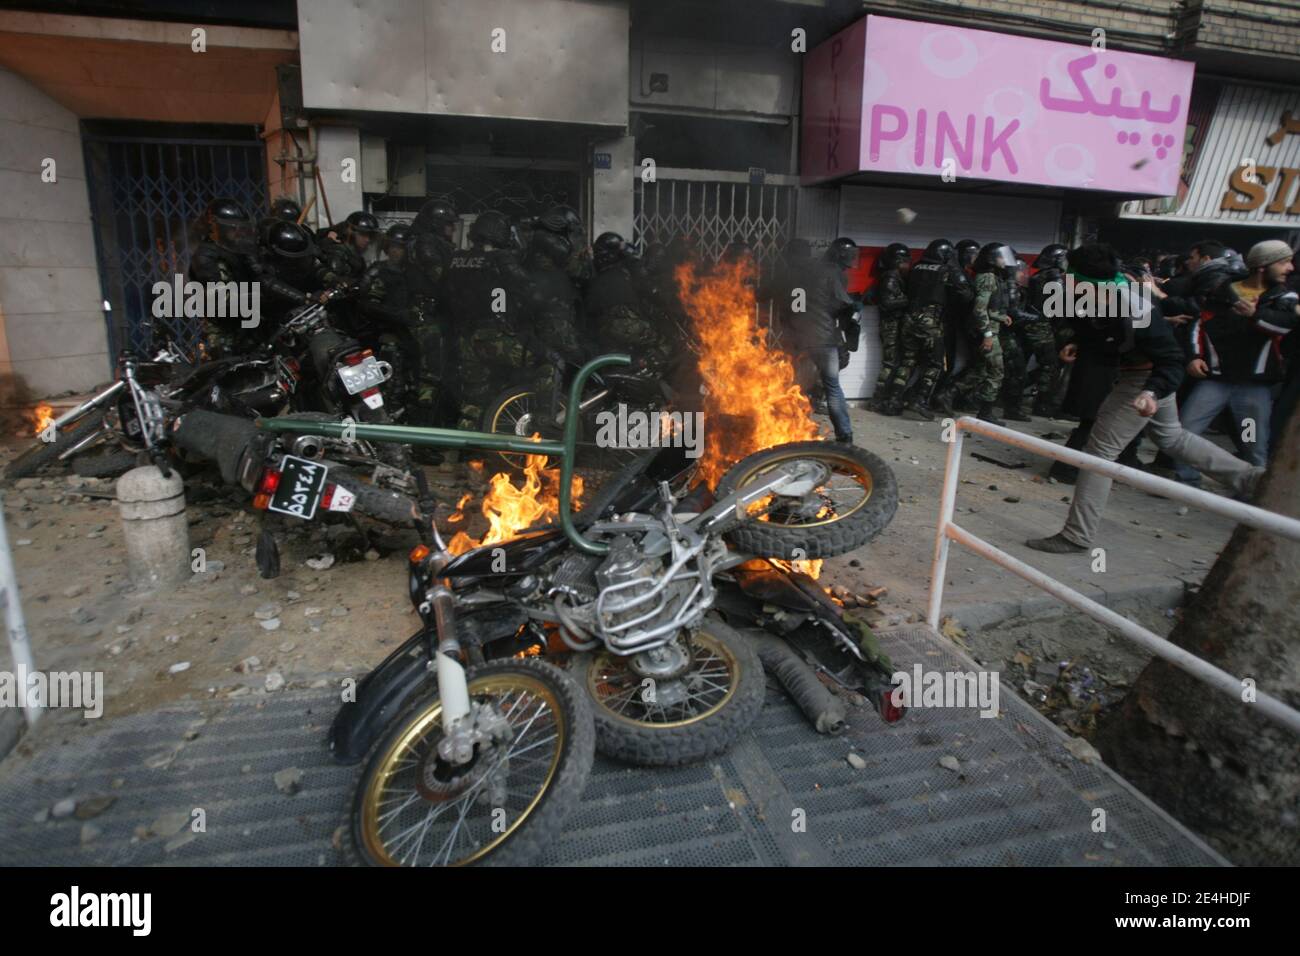 Anti-government protesters and security forces clashed heavily in Tehran, Iran, on December 27, 2009. Police motorcycles burn as an Iranian opposition protester aims a stone at security forces during clashes. Security forces shot dead four protesters in Tehran in a crackdown on vast crowds of opposition supporters who turned a Shiite mourning event into a mass protest, a website and witnesses said. Photo by ABACAPRESS.COM Stock Photo